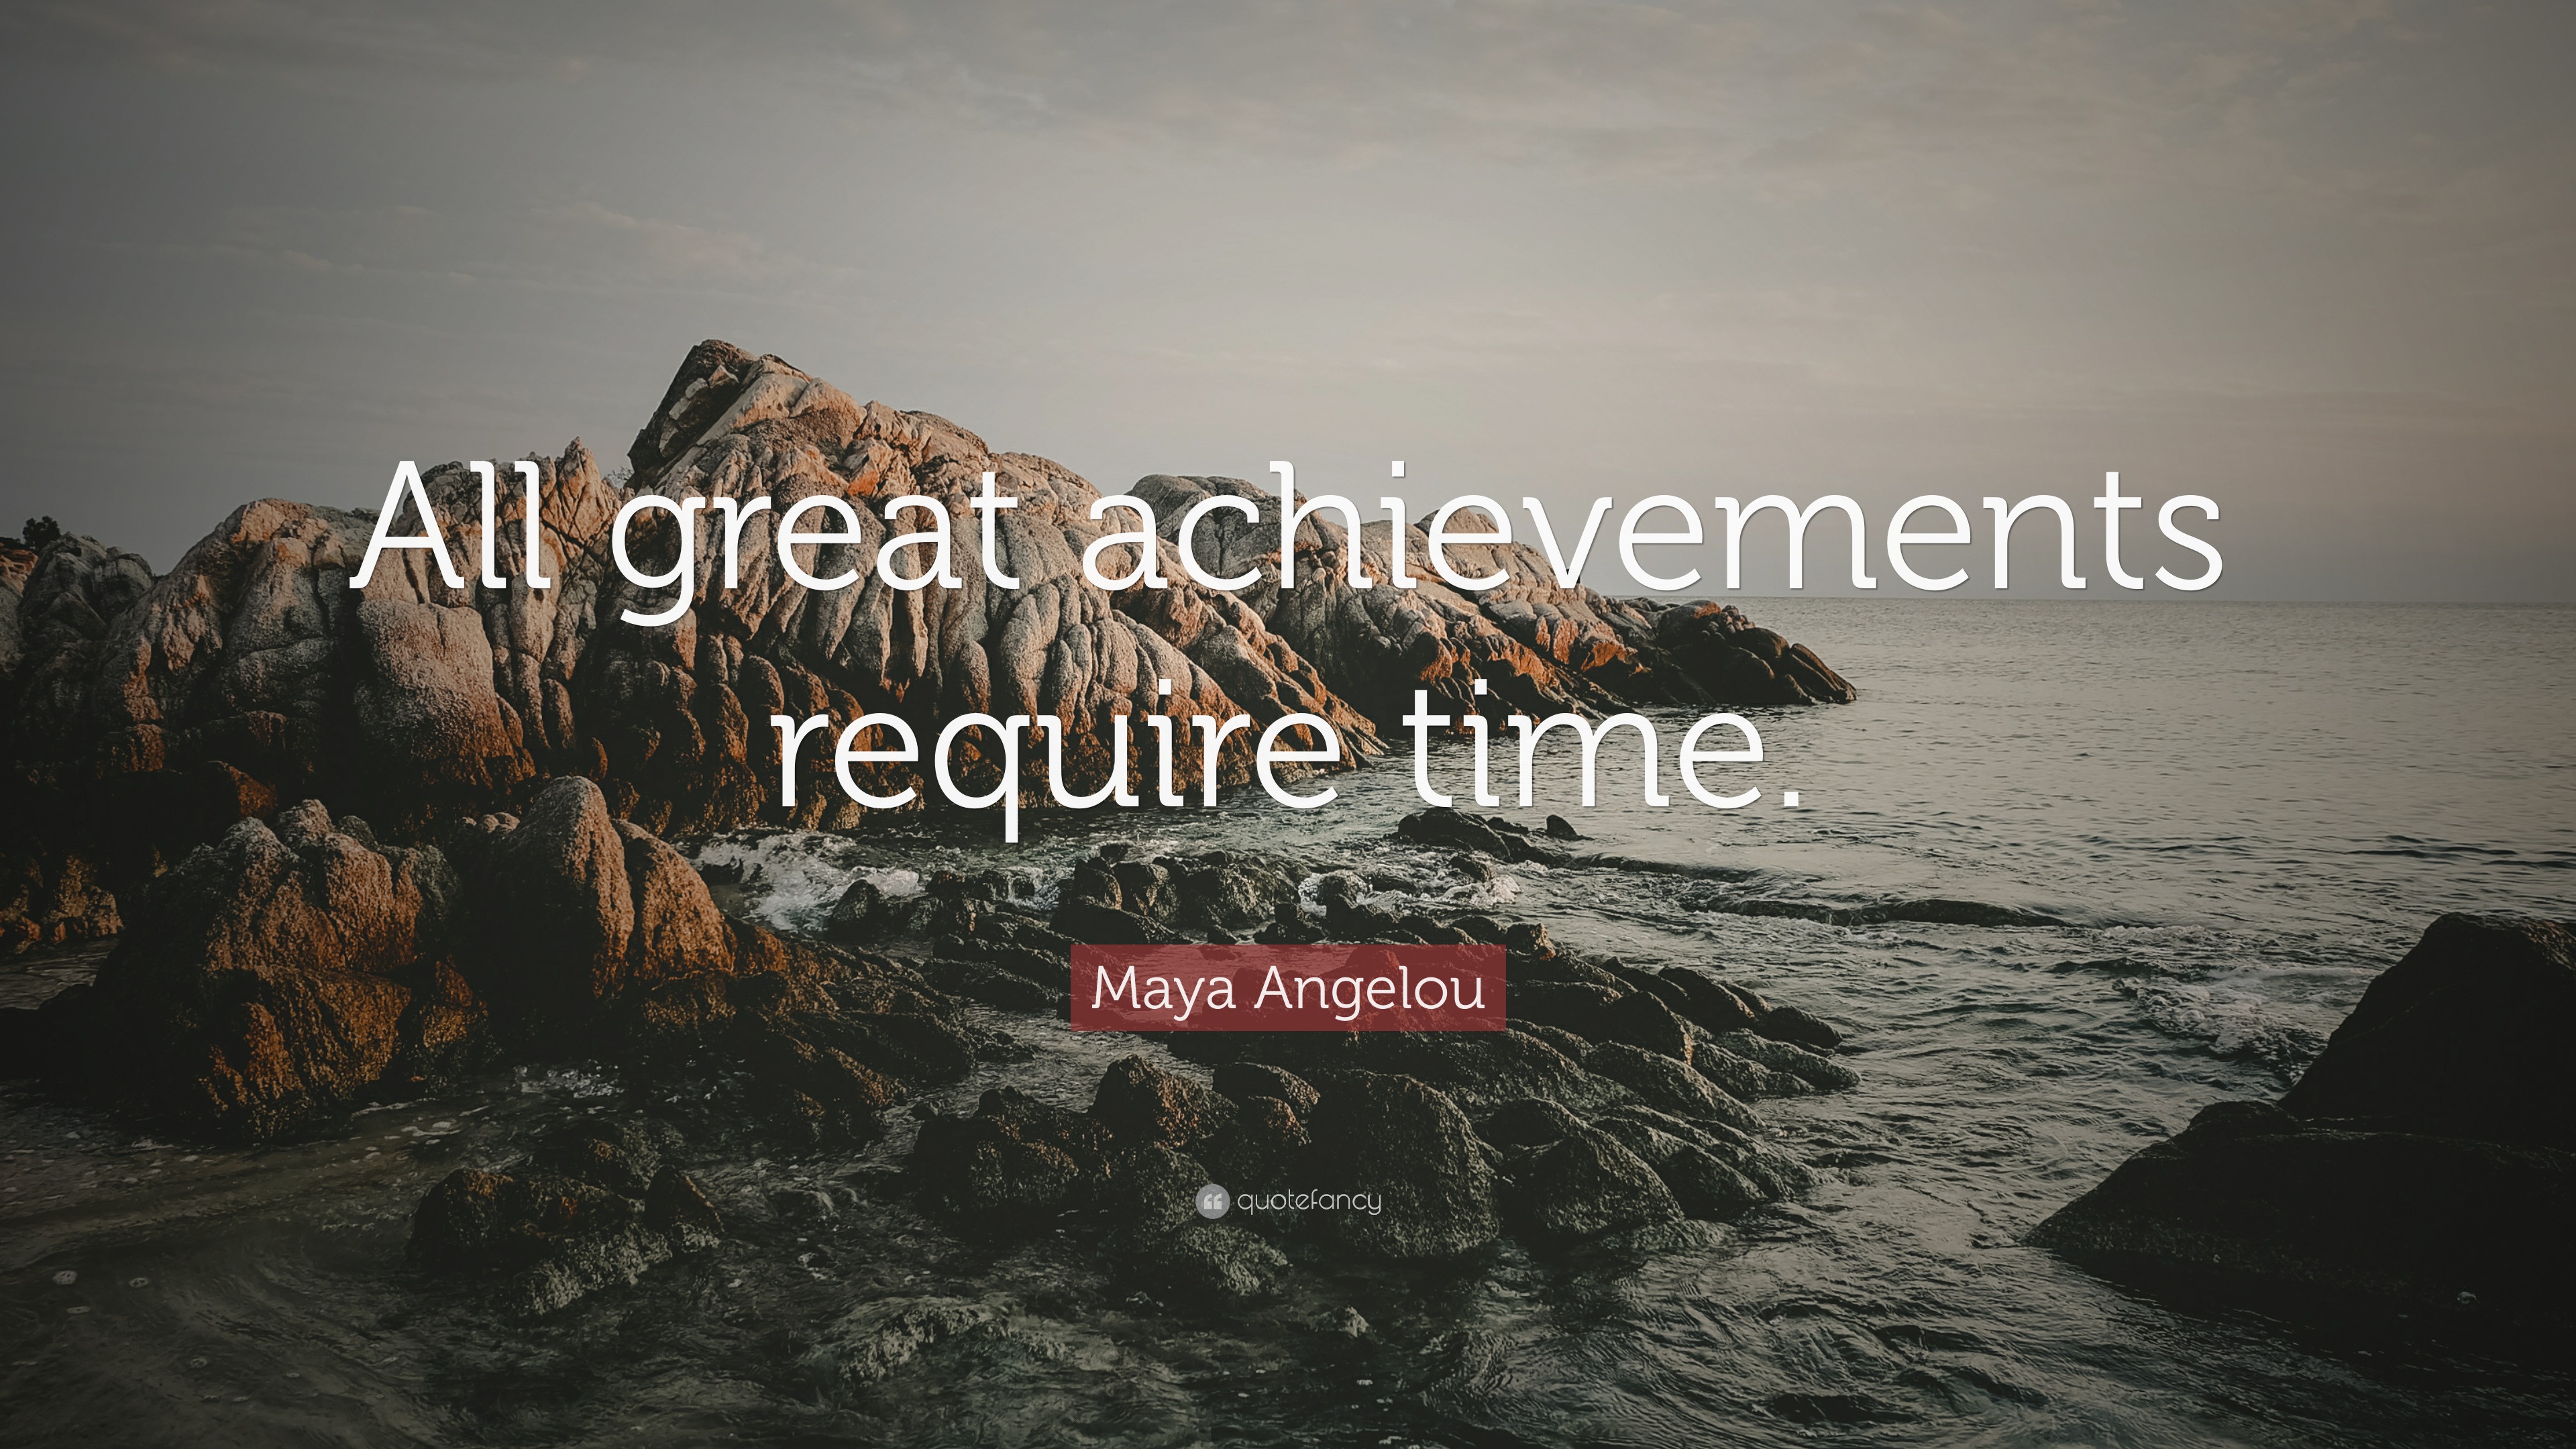 Maya Angelou Quote: “All great achievements require time.”